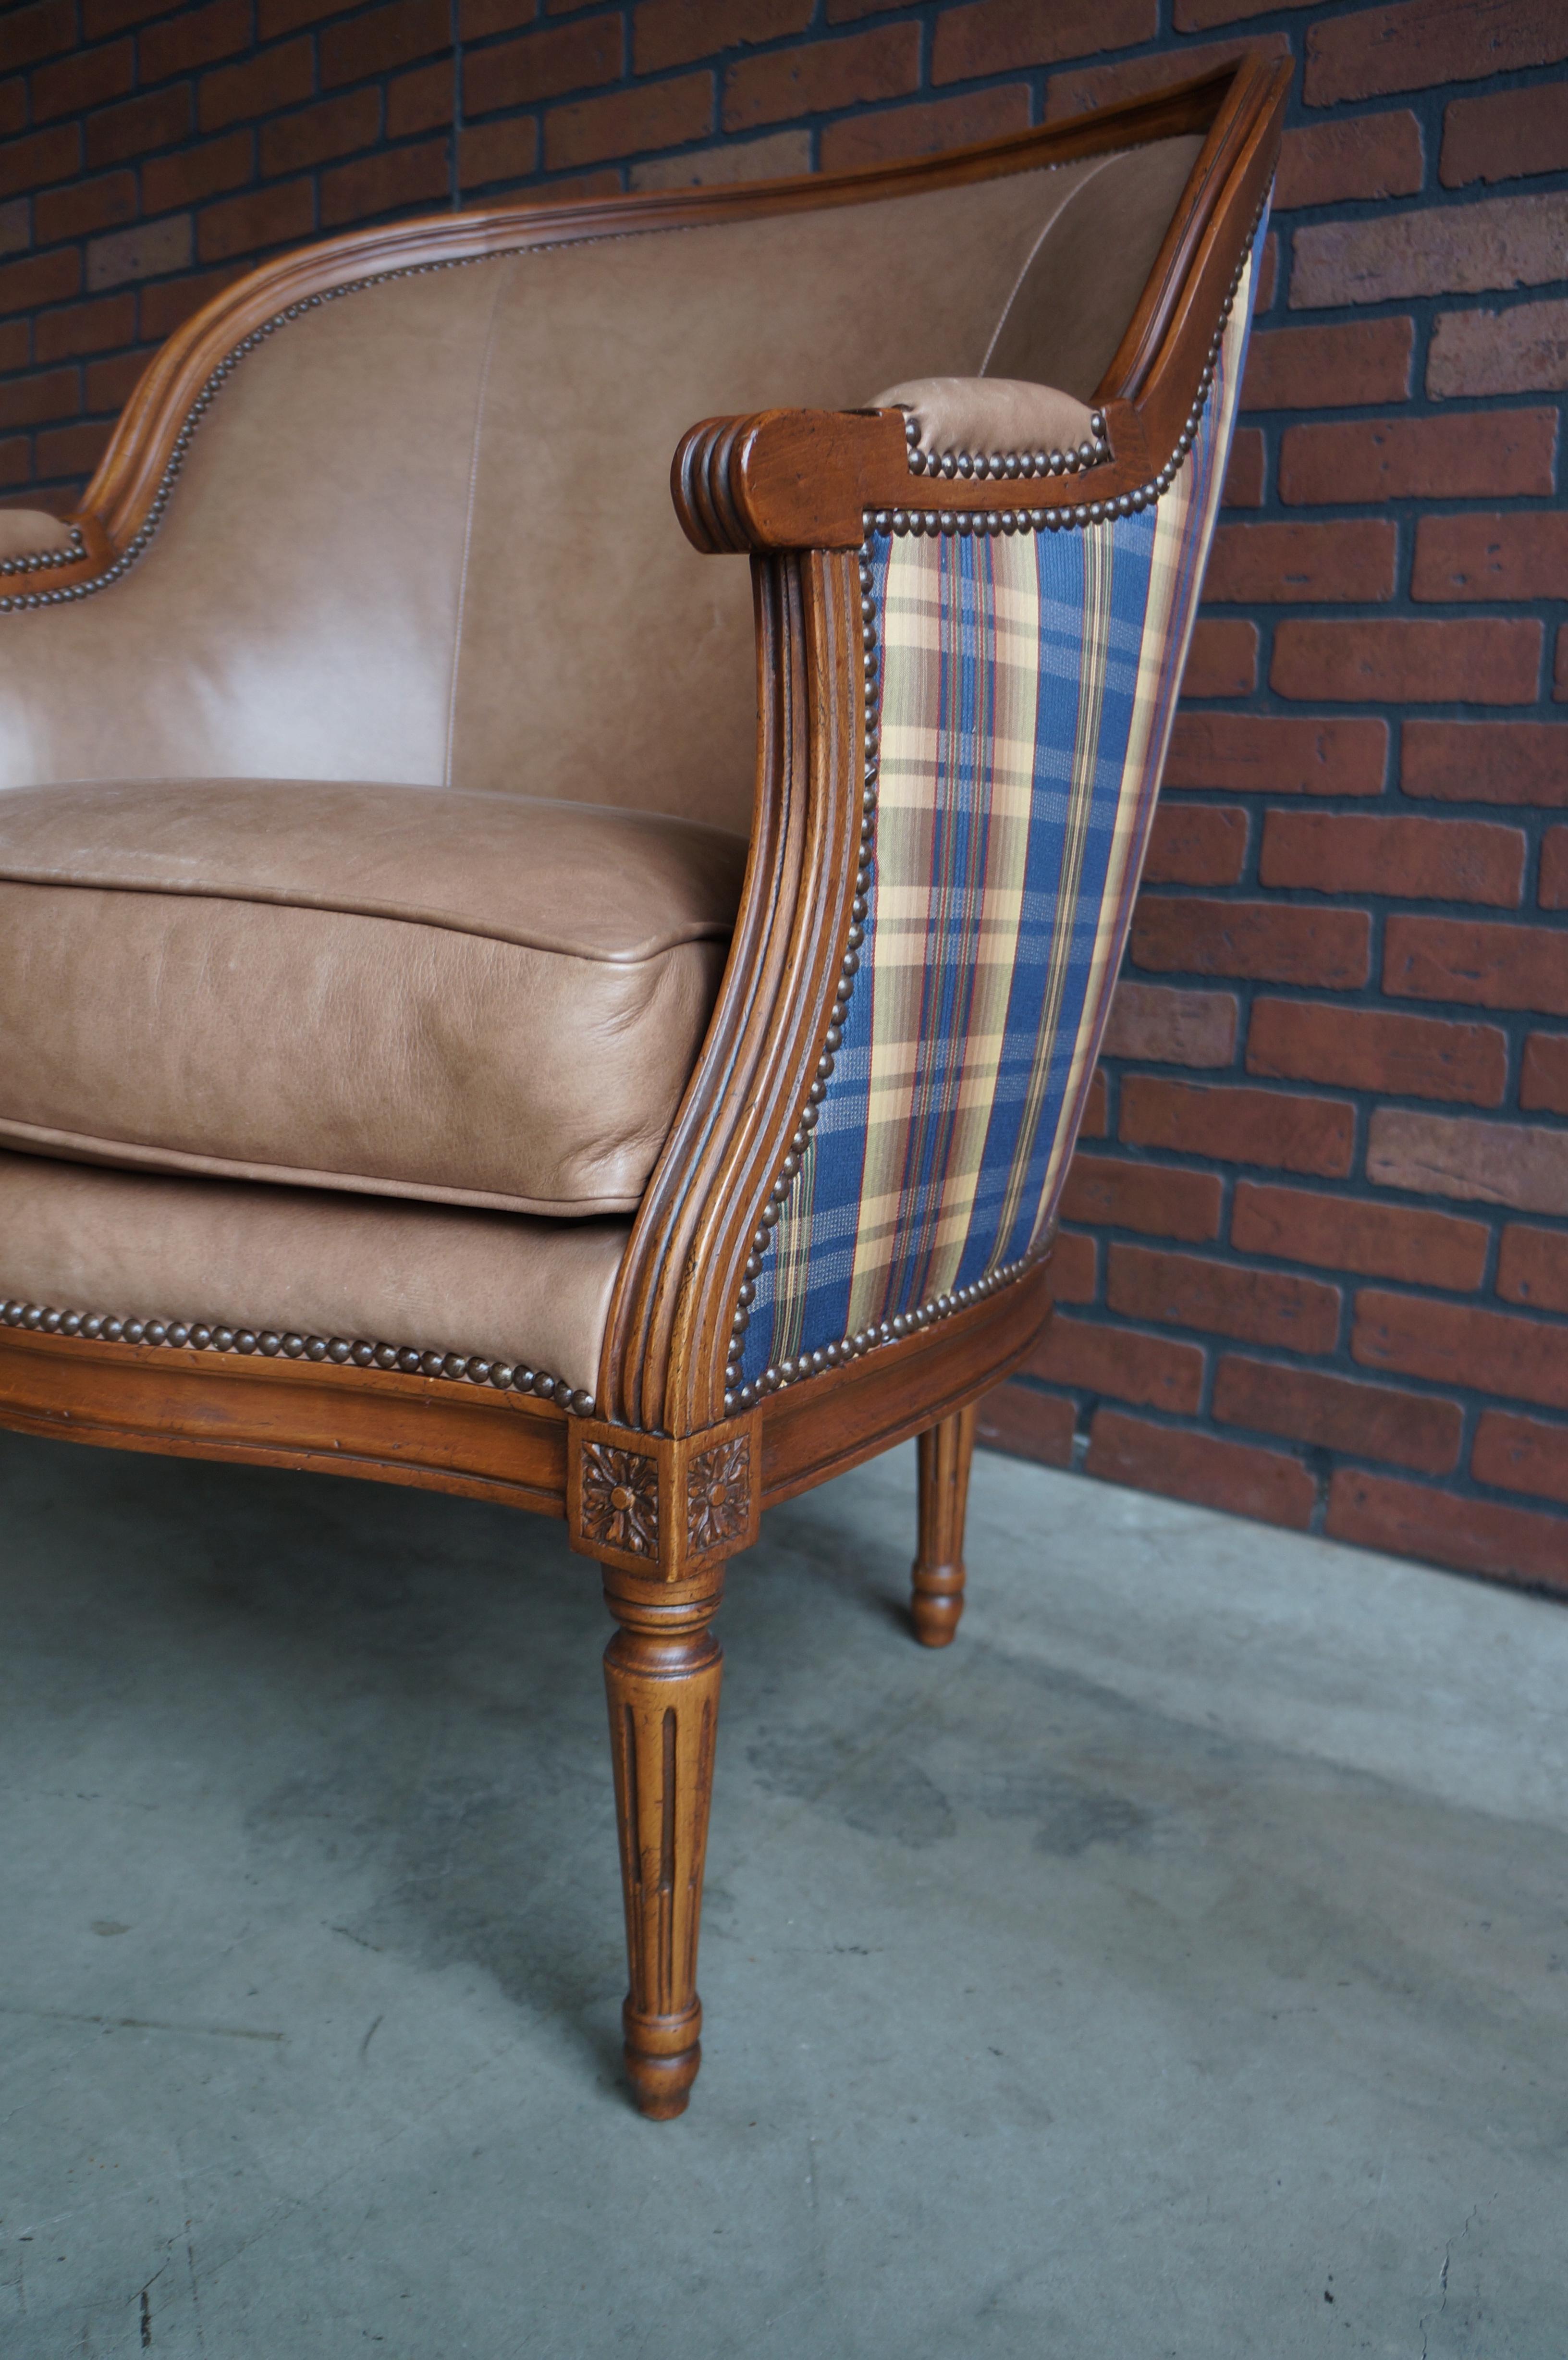 Exceptional quality and styling combine to give this Baker Furniture chair unending durability and timeless appeal.  Featuring a carved wood frame with dual leather and fabric upholstery with nailhead trim.